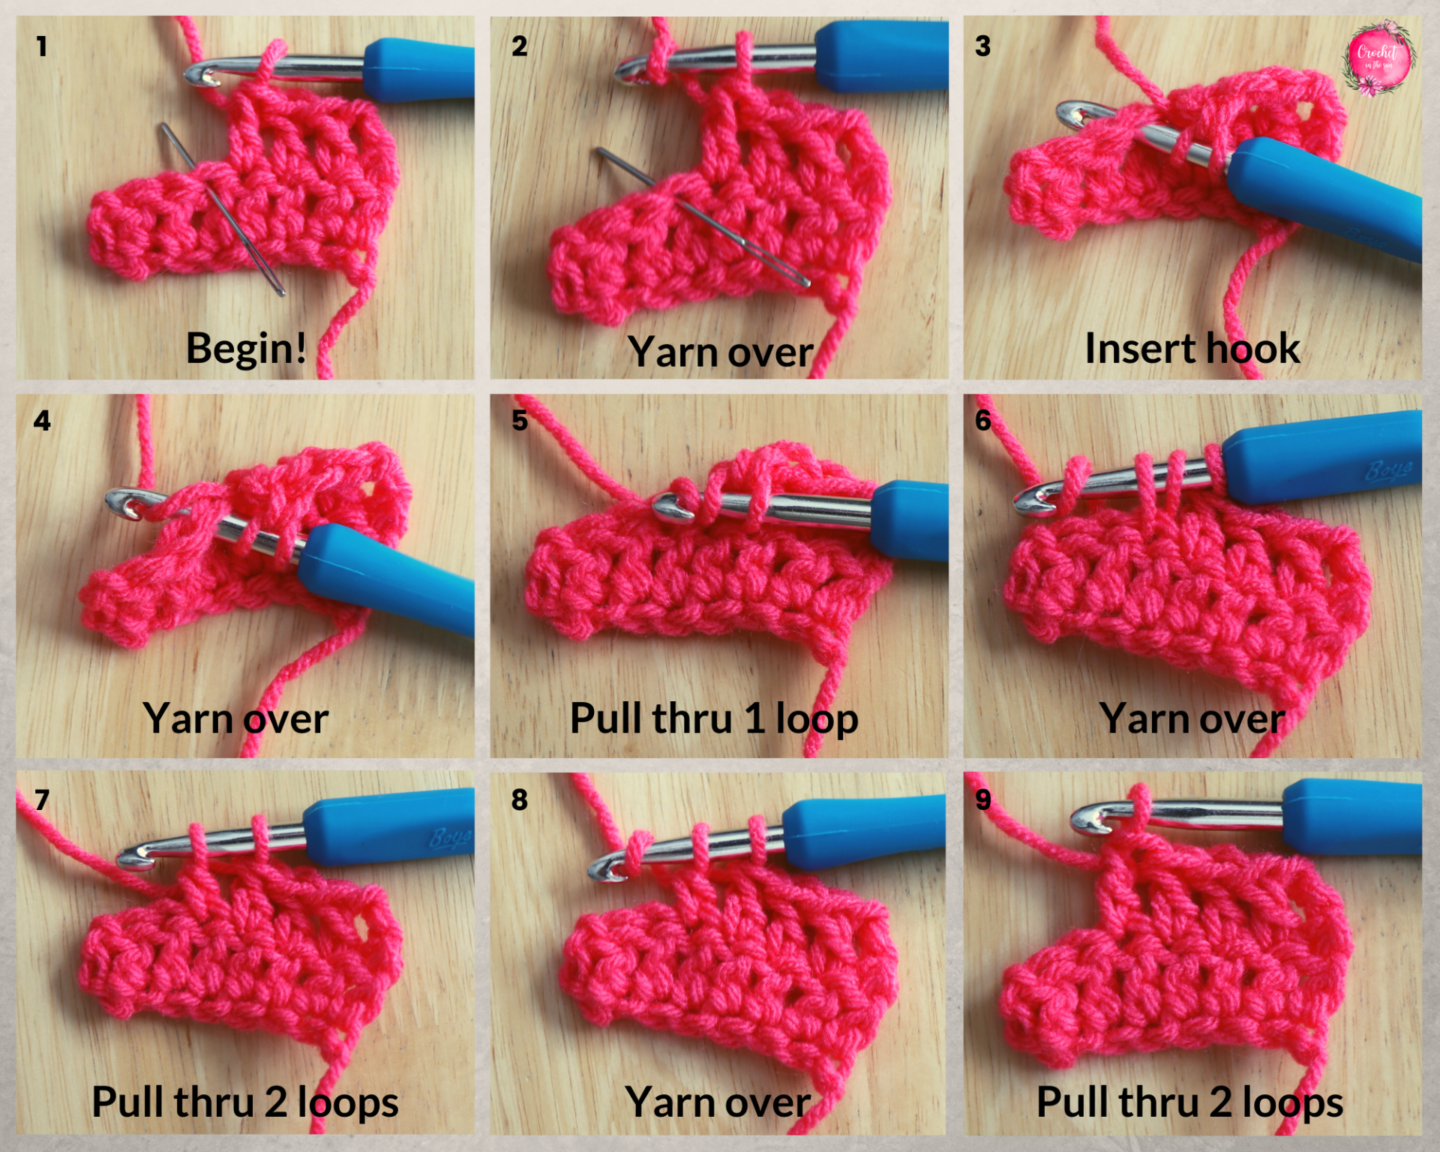 Learn How To Crochet: A Complete Guide For Absolute Beginners